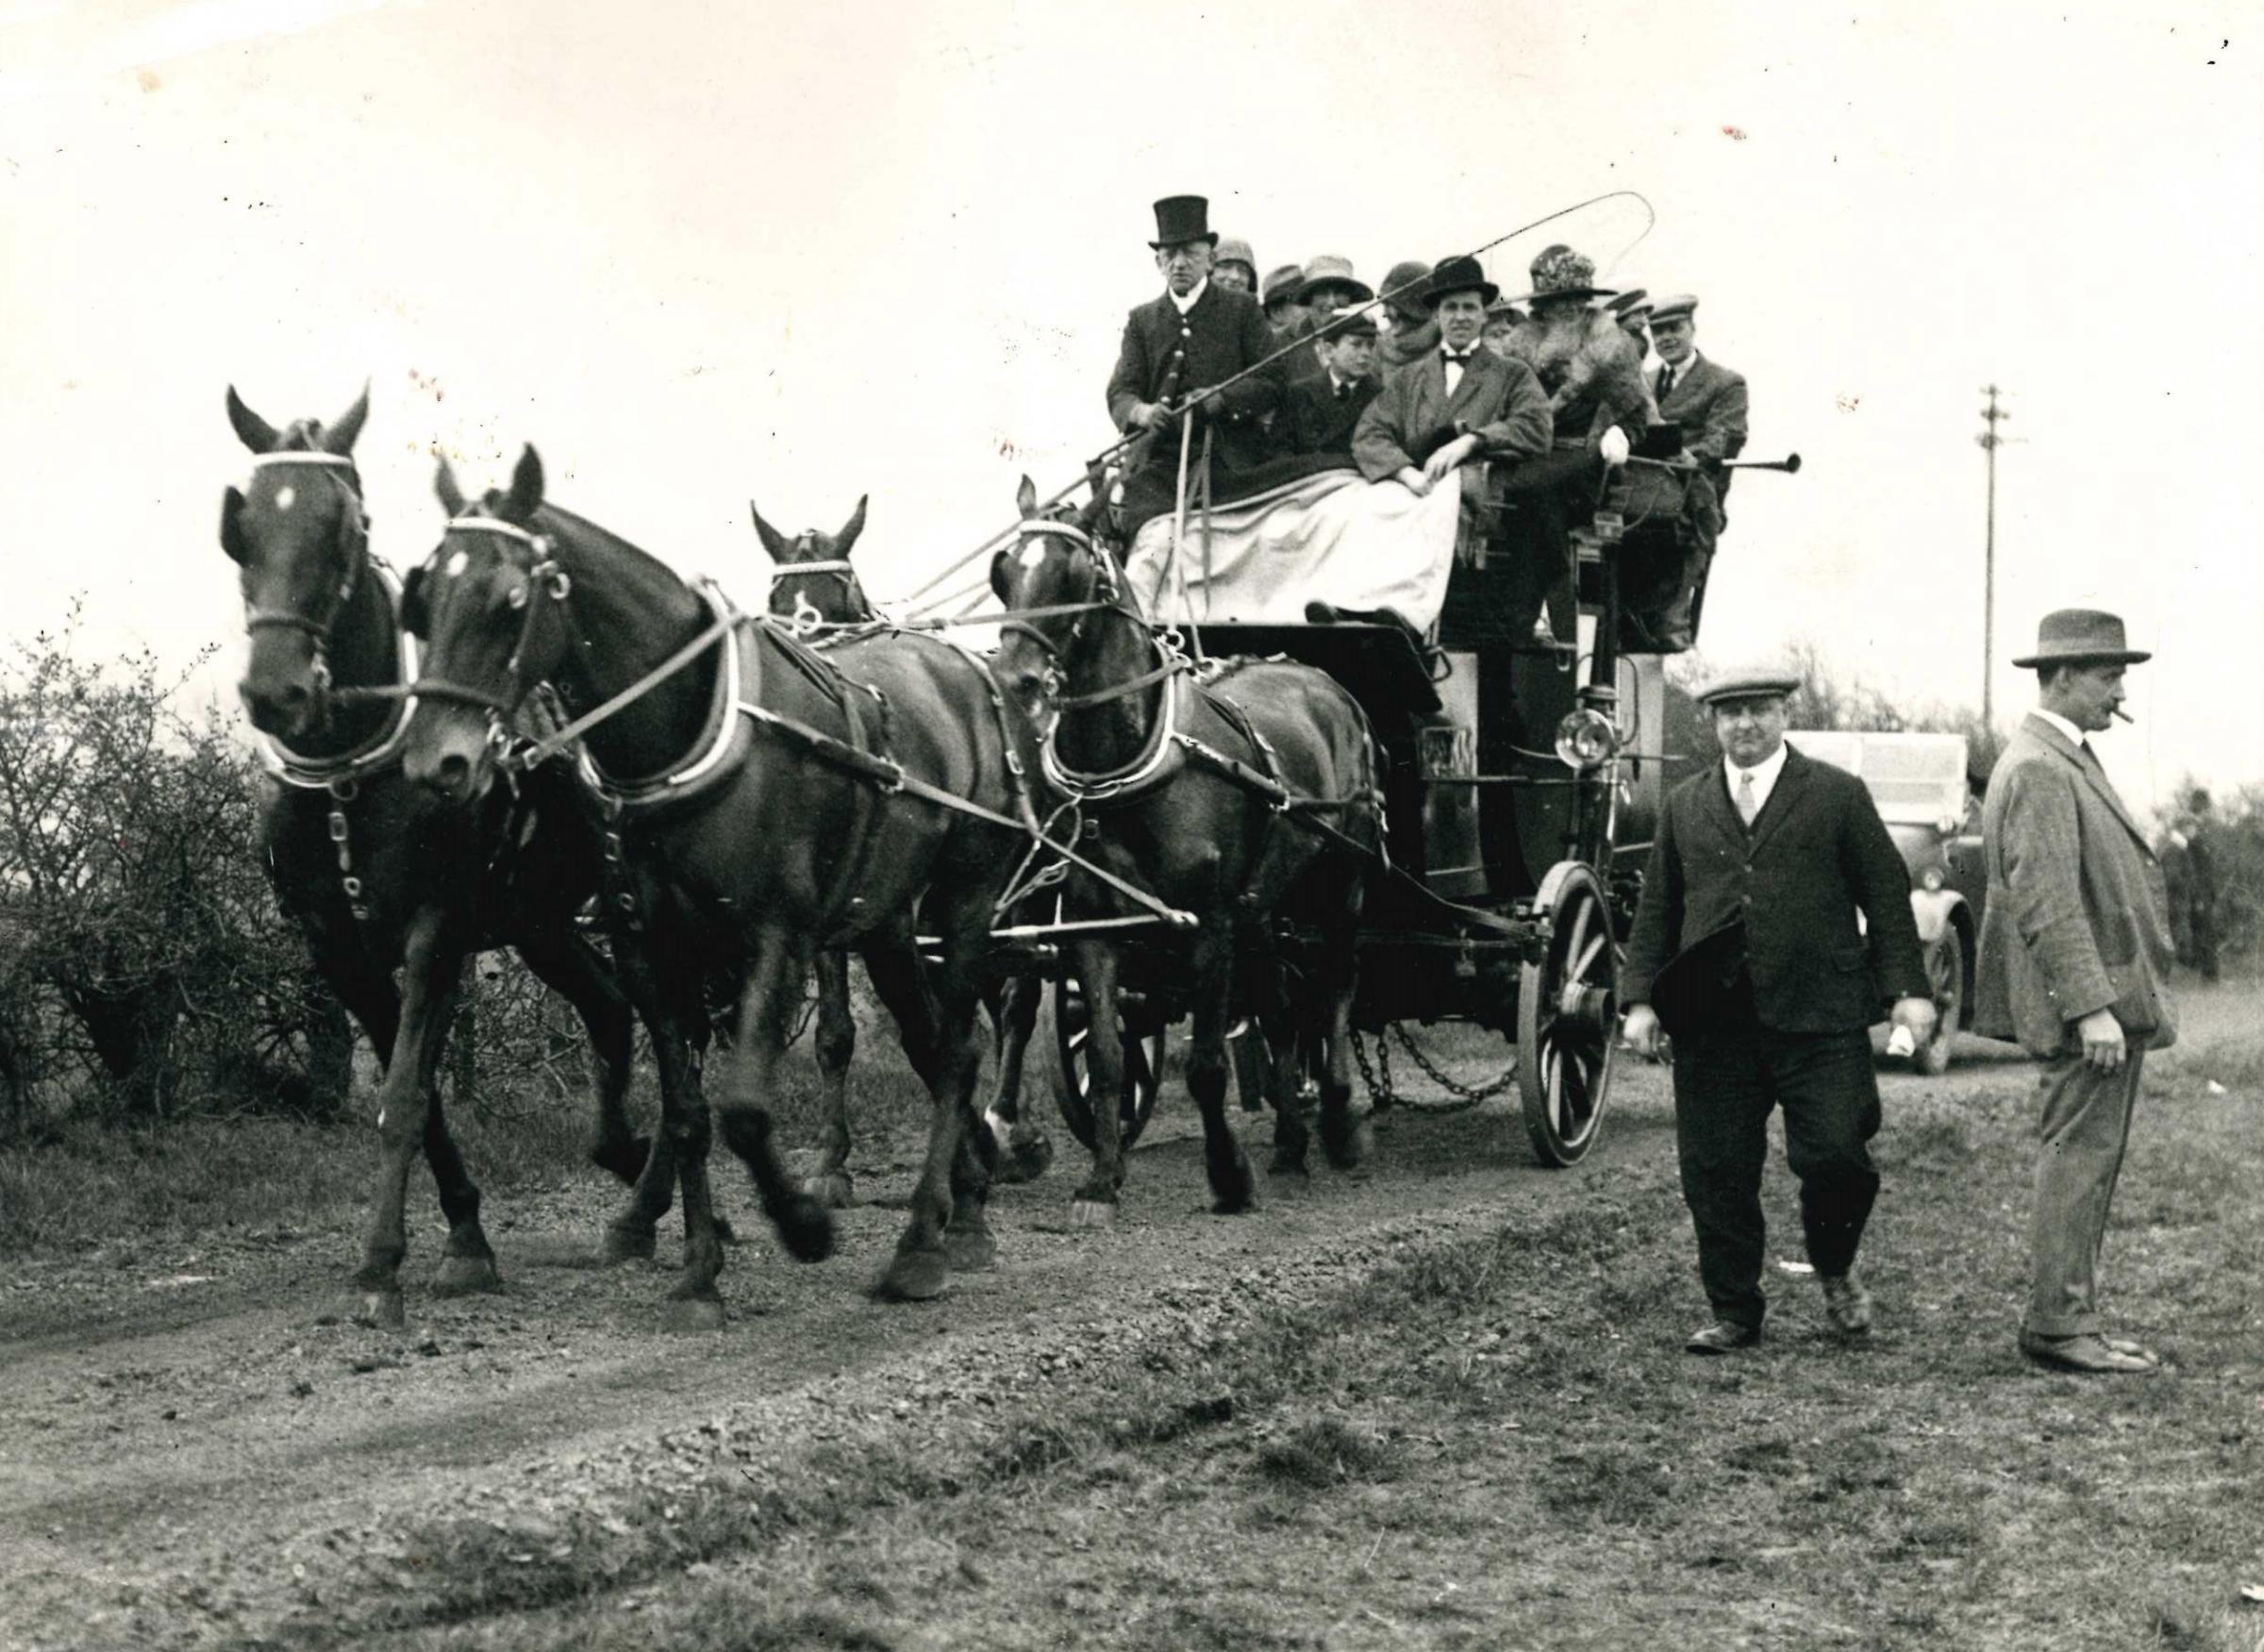 Major Hesketh, secretary of Holcombe Hung arrives at the point to point in style in 1926